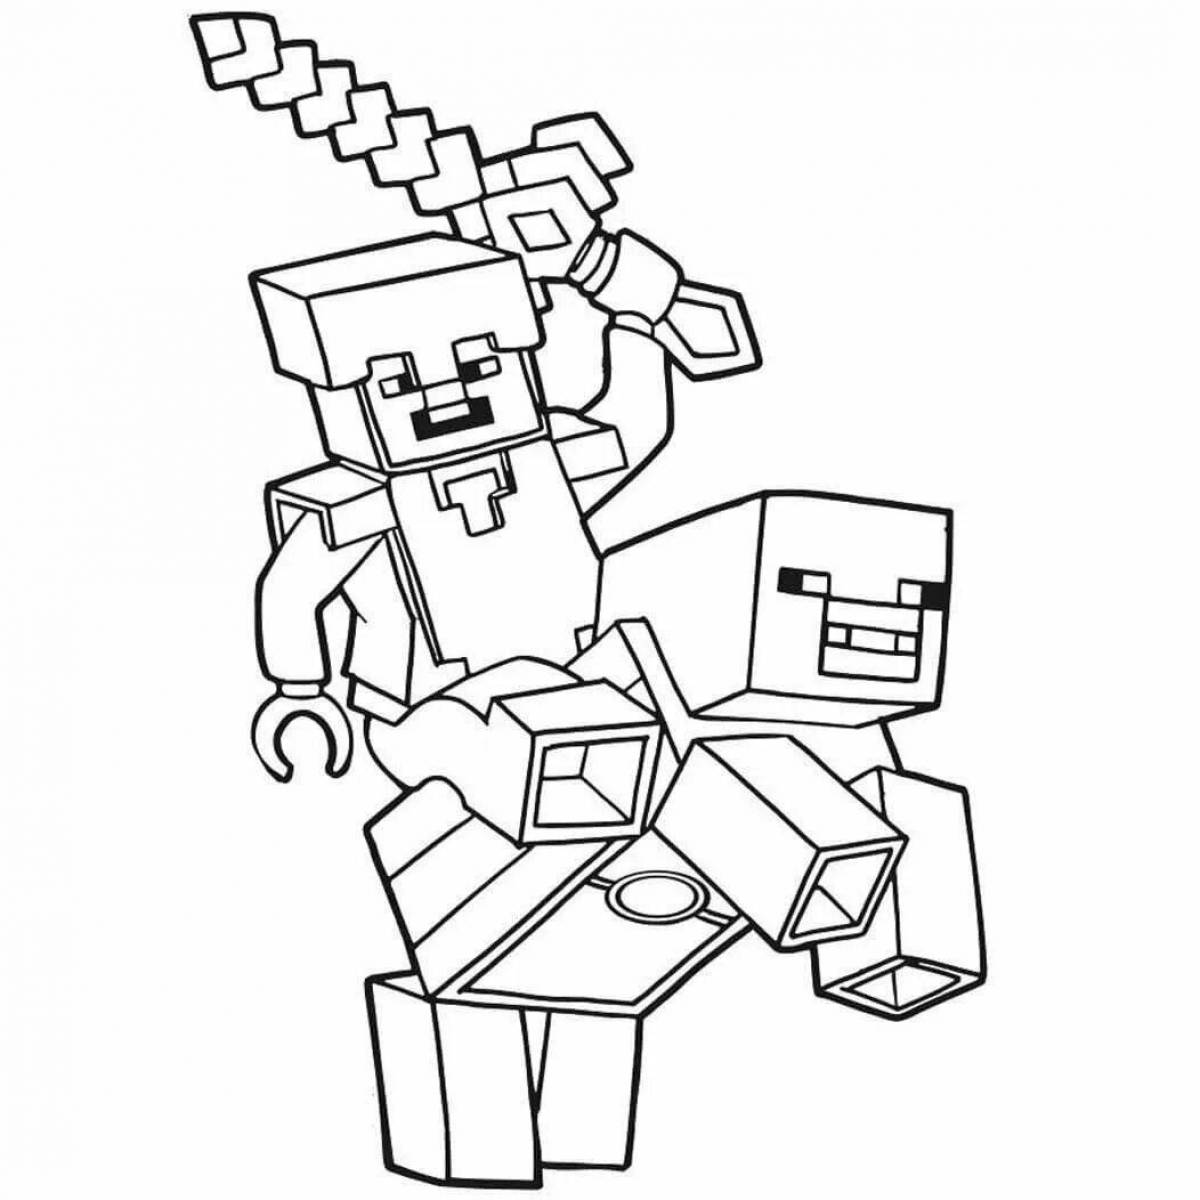 Fun coloring minecraft for boys 6-7 years old